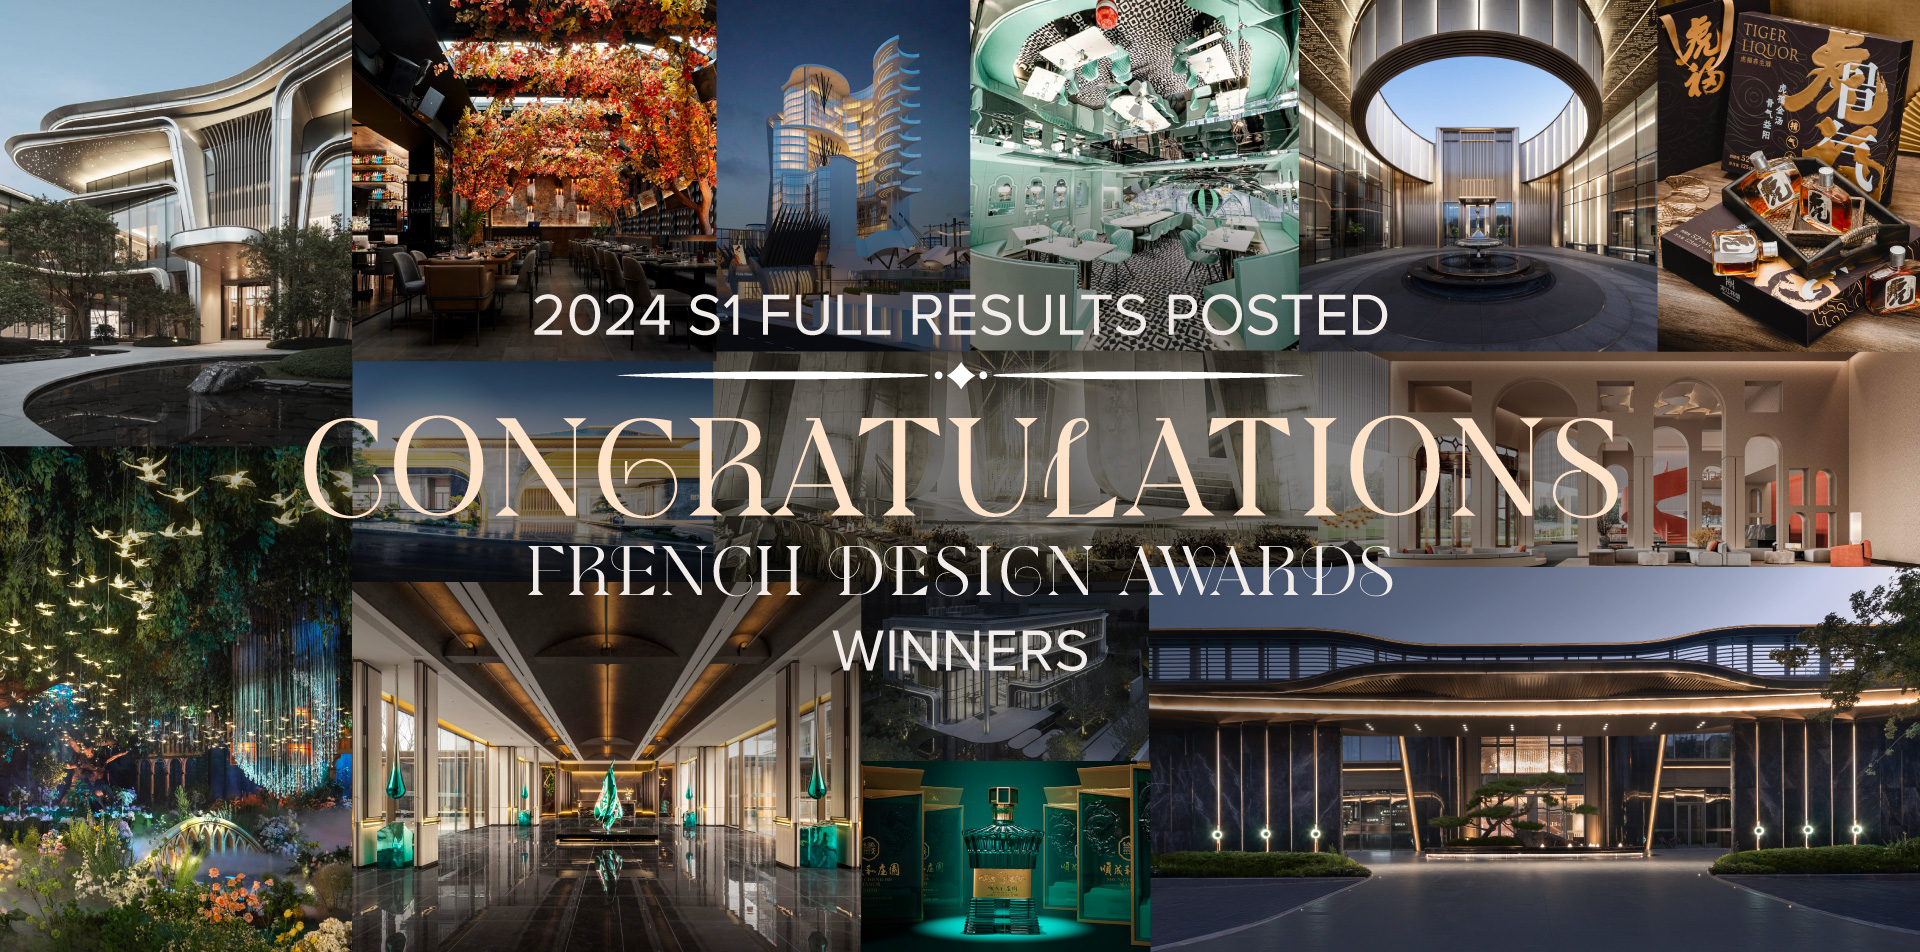 2024 French Design Awards S1 Full Results Announced!